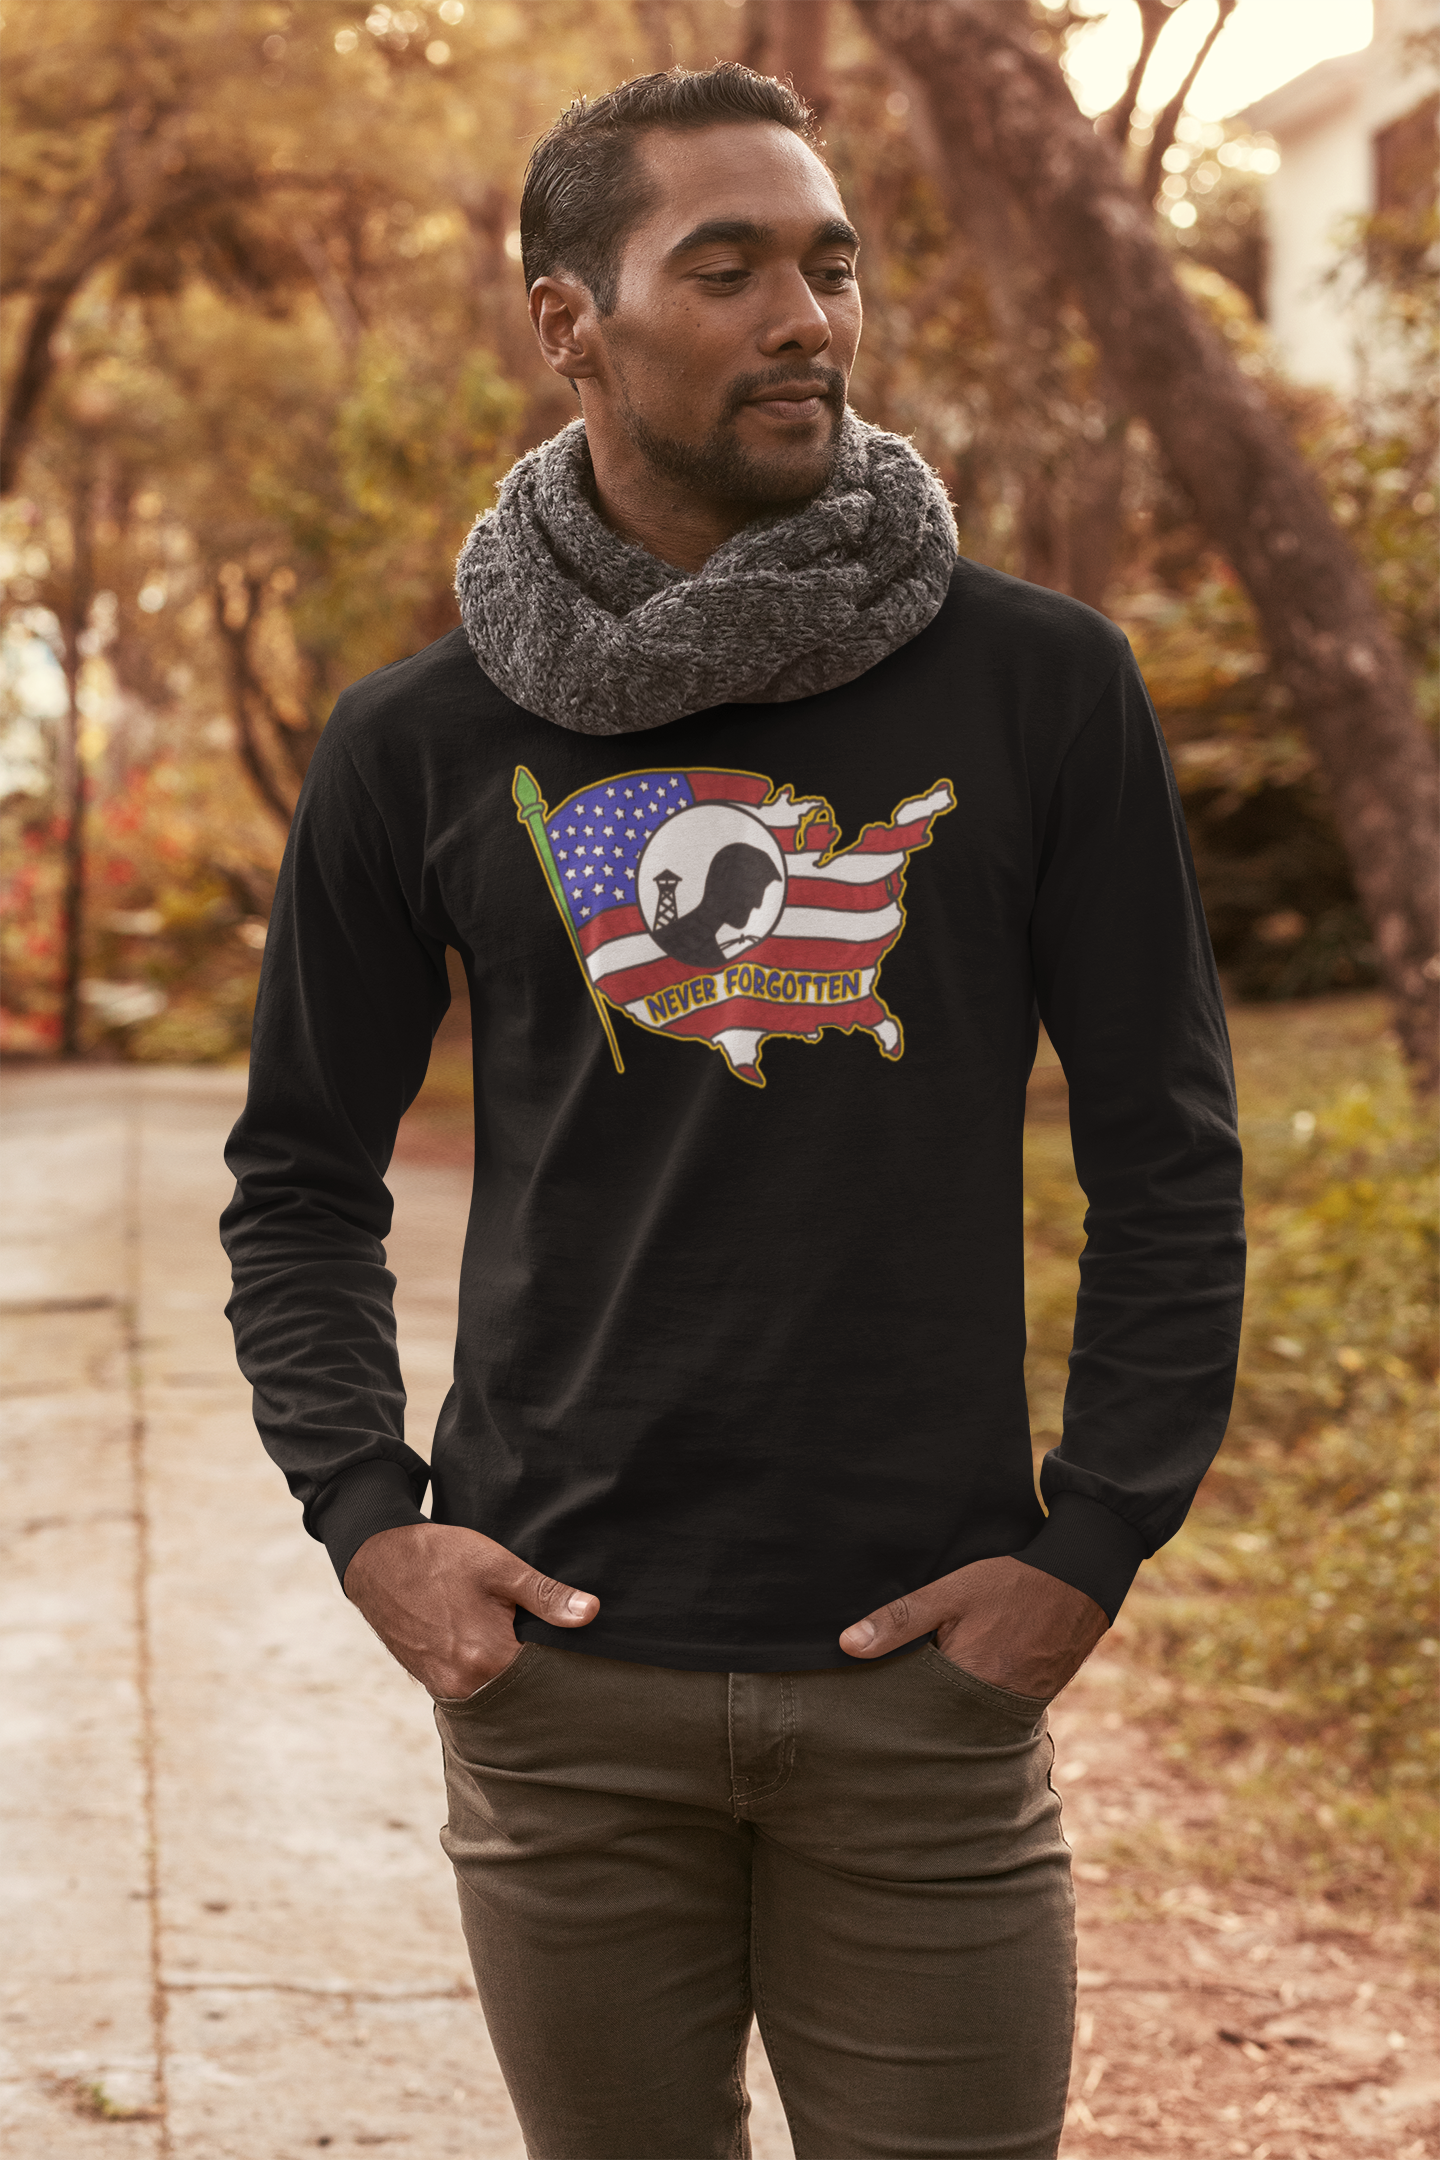 ... NEVER FORGOTTEN Fitted Light Weight Patriotic Military Long Sleeve T-Shirt (XS-3XL):  Men's Bella+Canvas 3501 - FREE SHIPPING